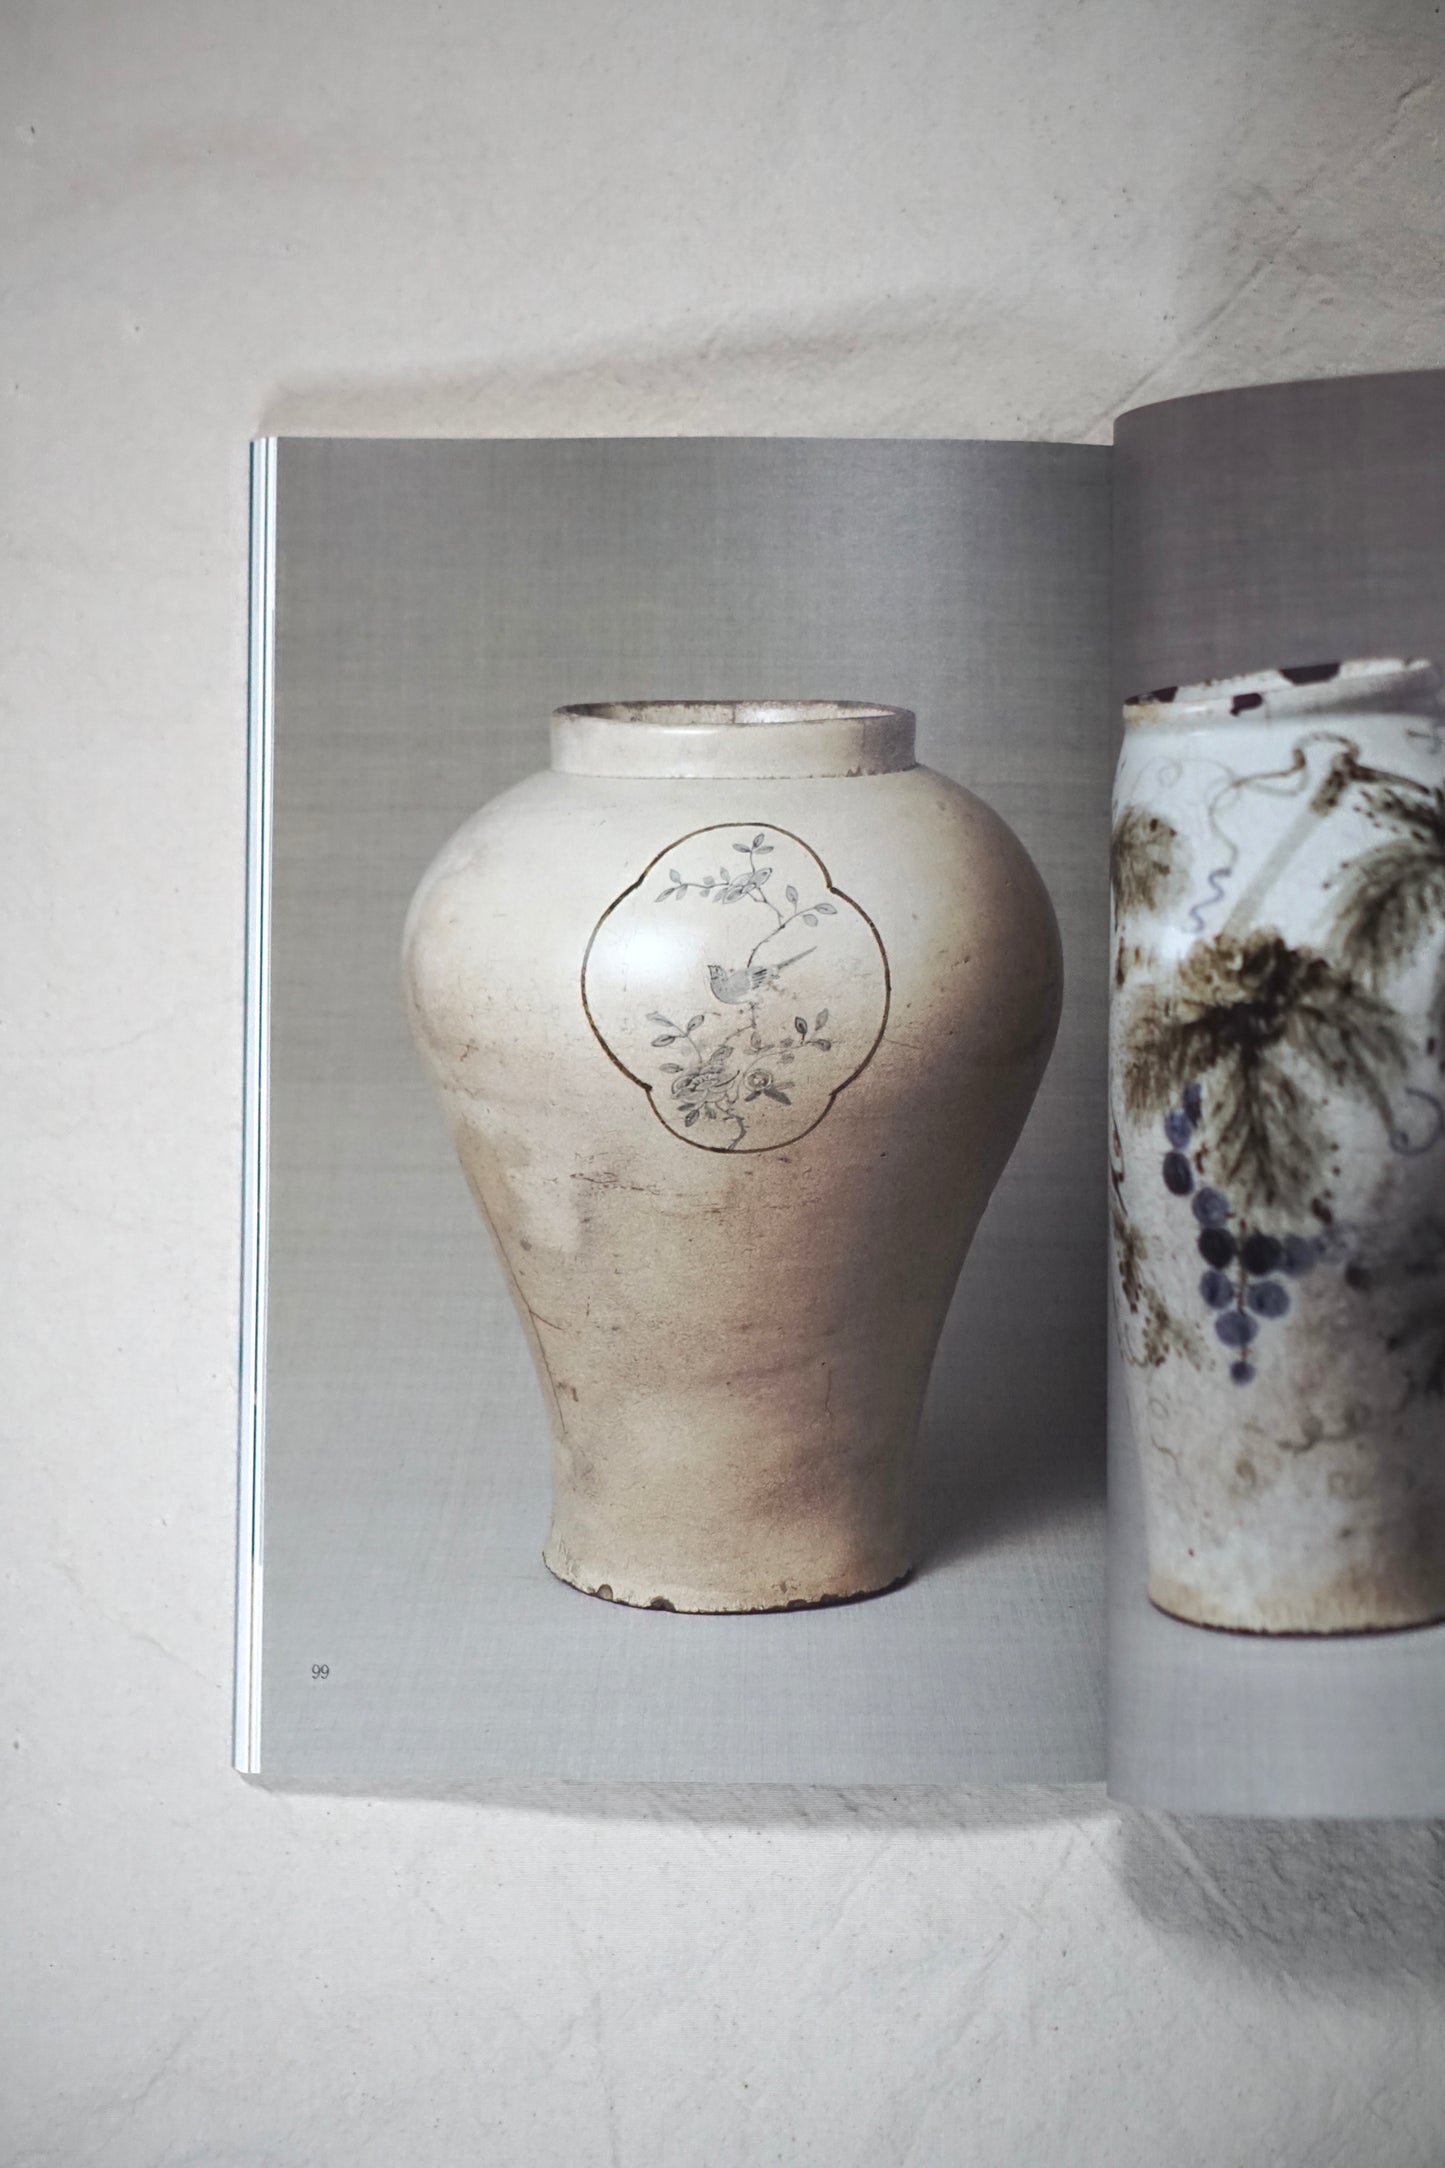 Catalog of Korean ceramics owned by the Japan Folk Crafts Museum